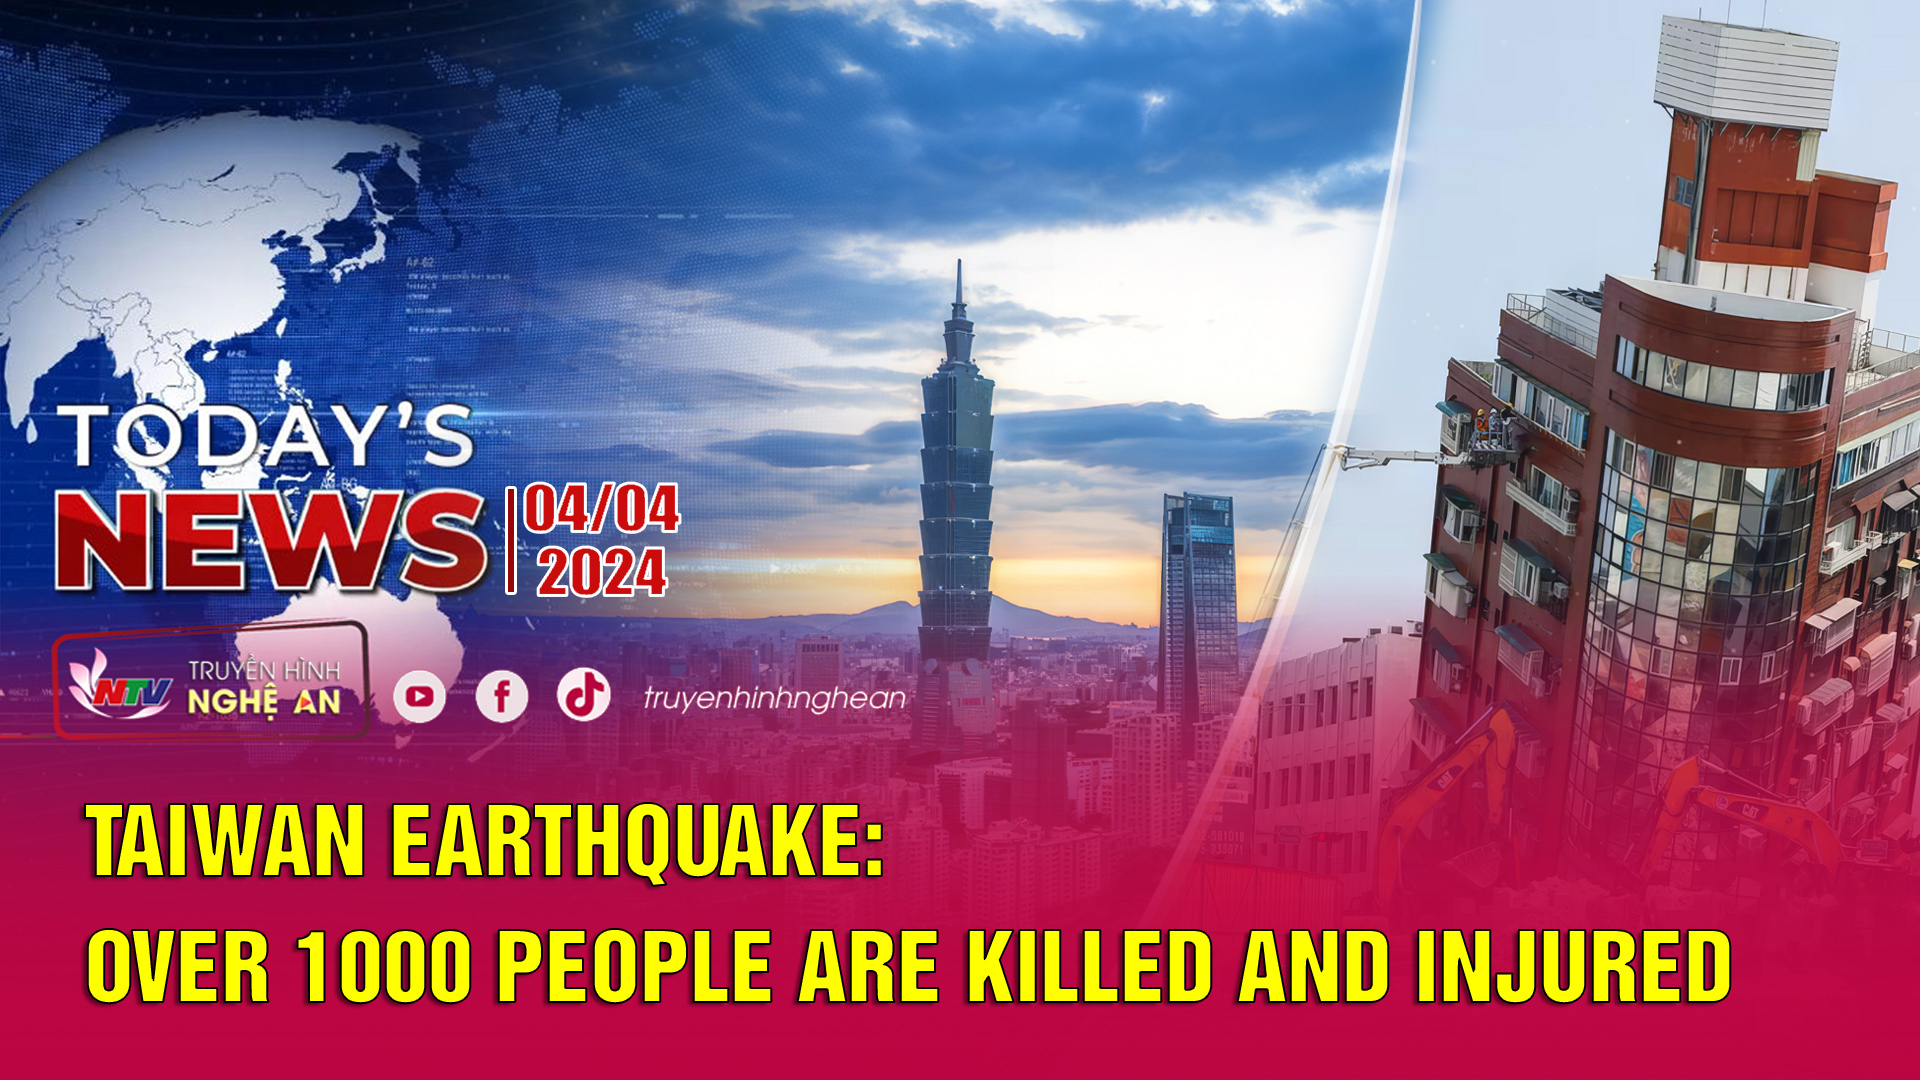 Today's News 4/4/2024: Taiwan earthquake: Over 1000 people are killed and injured